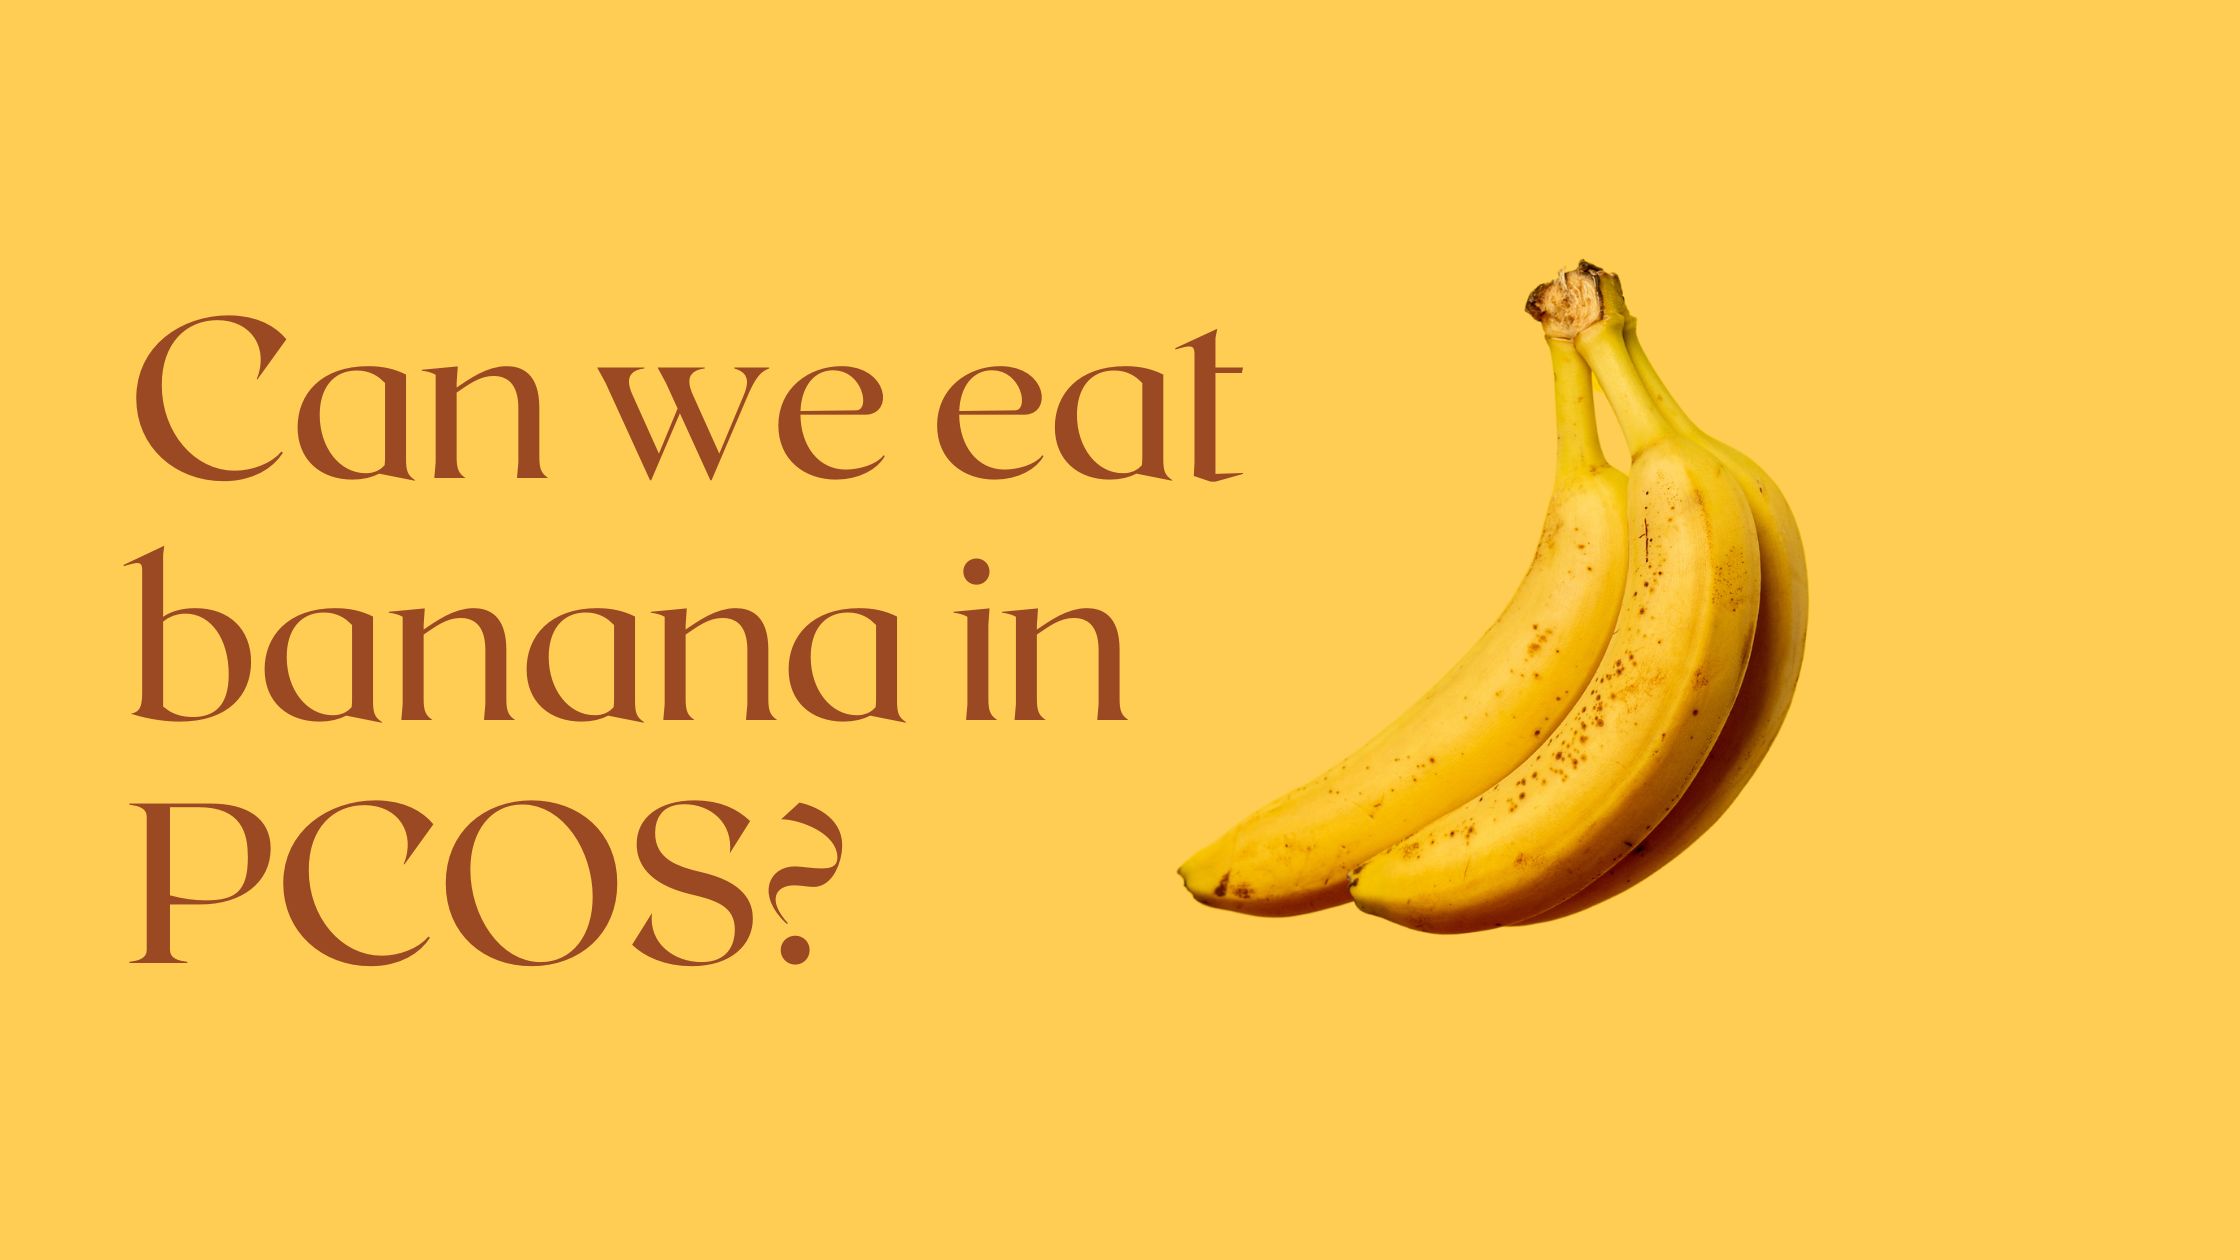 Can we eat banana in PCOS?